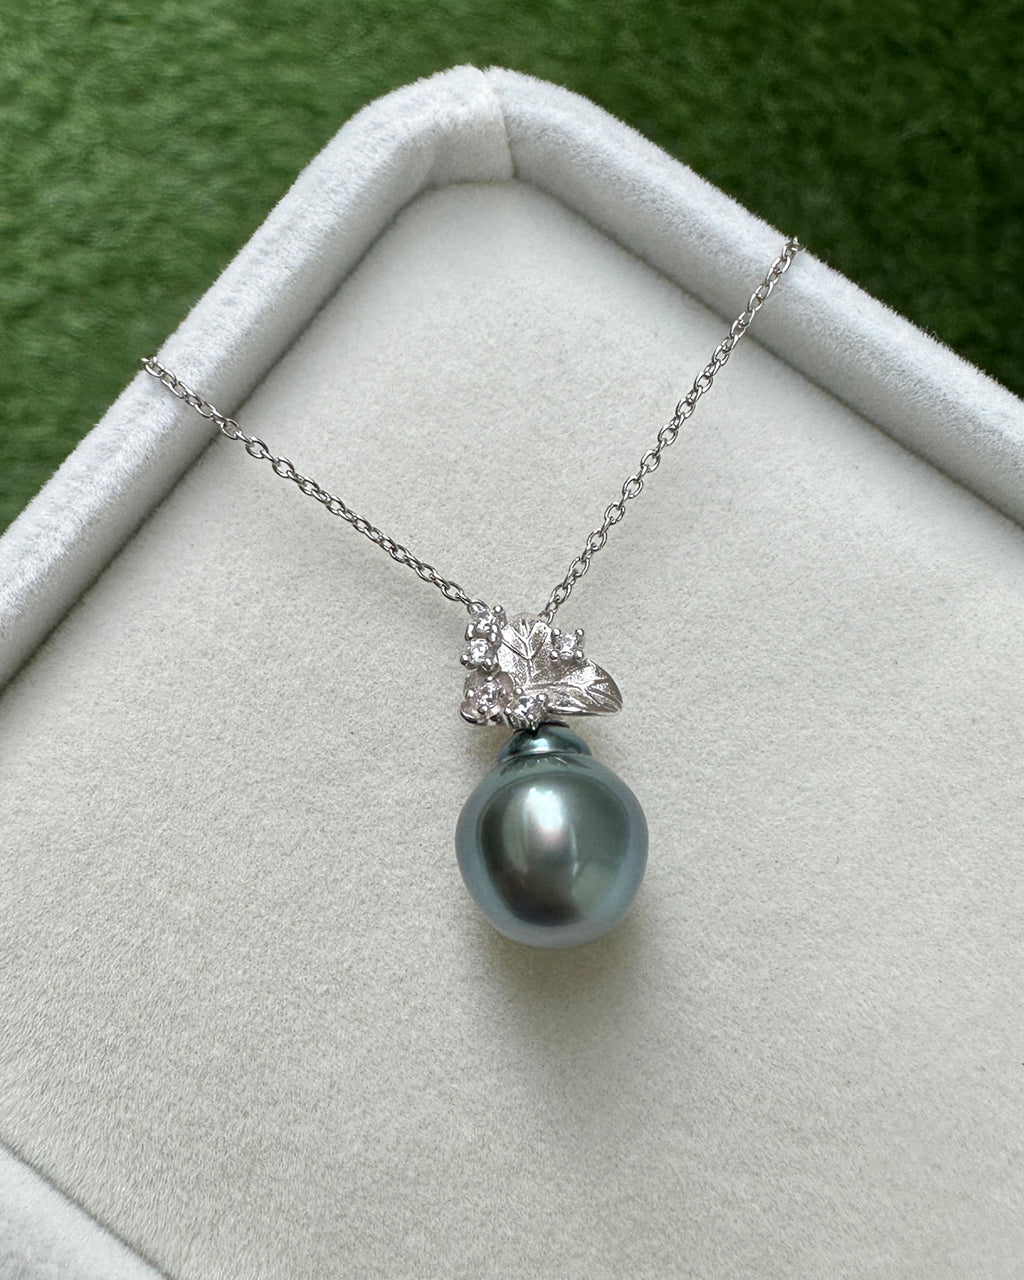 Tahitian Pearl Pendant Necklace - Flower Pot Sterling Silver Jewelry